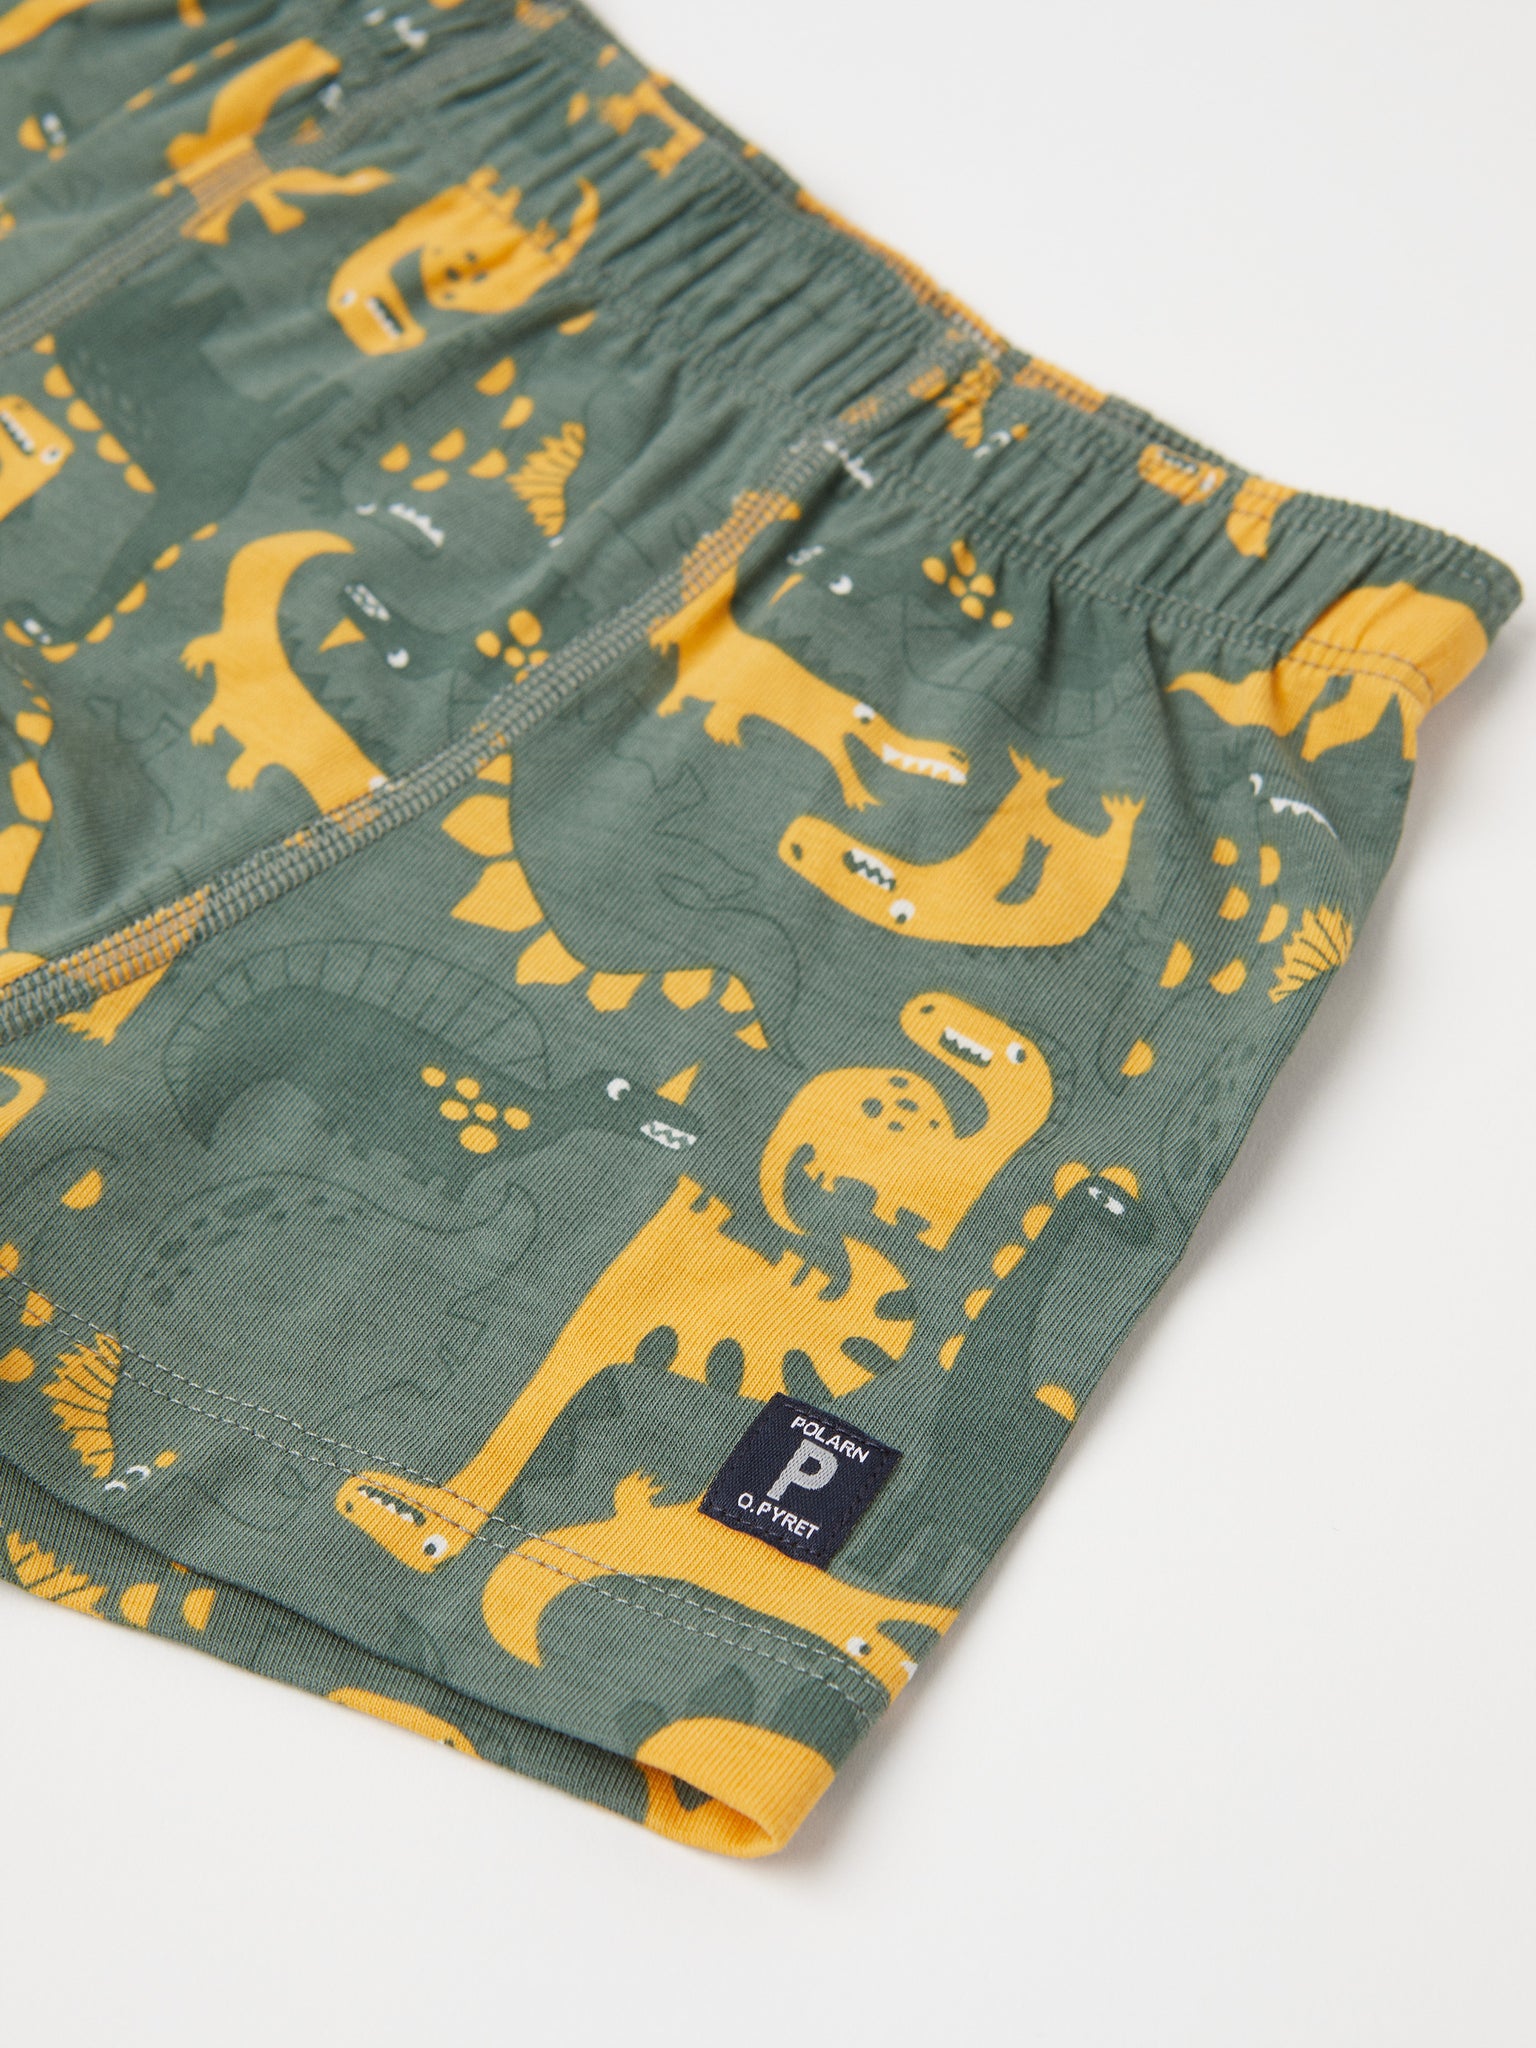 Organic Cotton Boys Boxer Shorts from the Polarn O. Pyret kidswear collection. Clothes made using sustainably sourced materials.